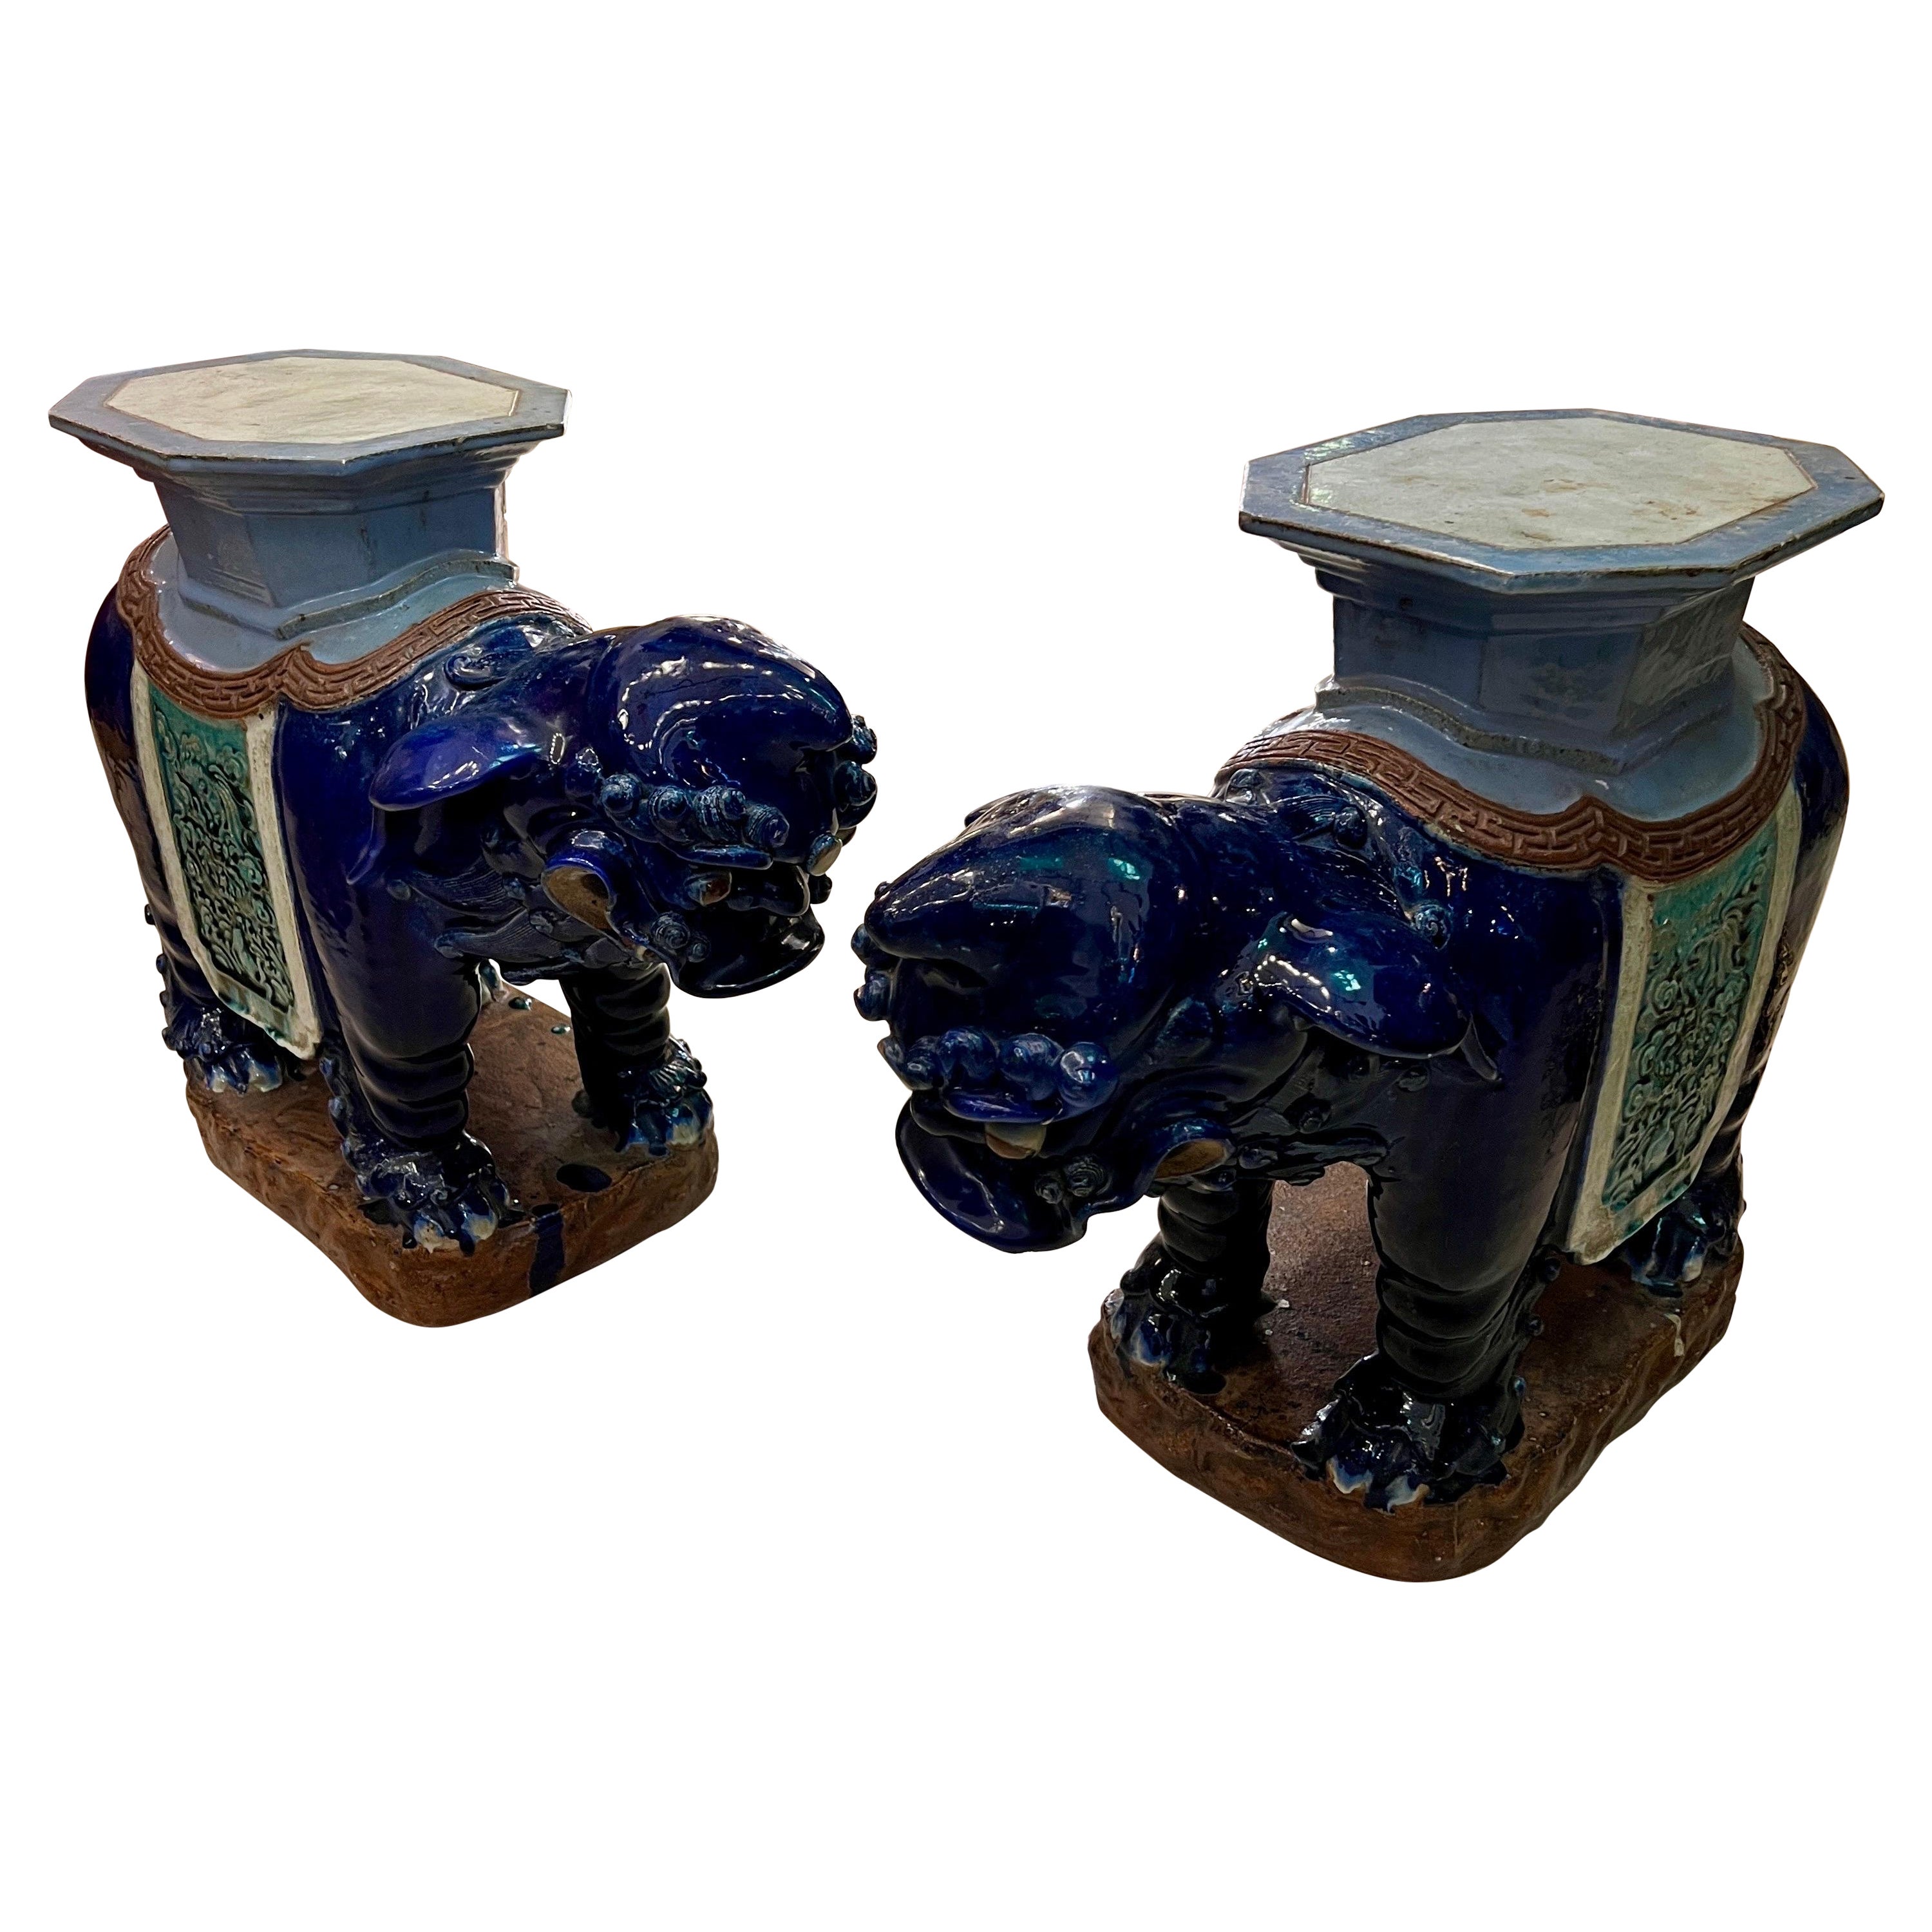 Pair of Vintage Vietnamese Ceramic Foo Dogs Tables / Plant Stands For Sale